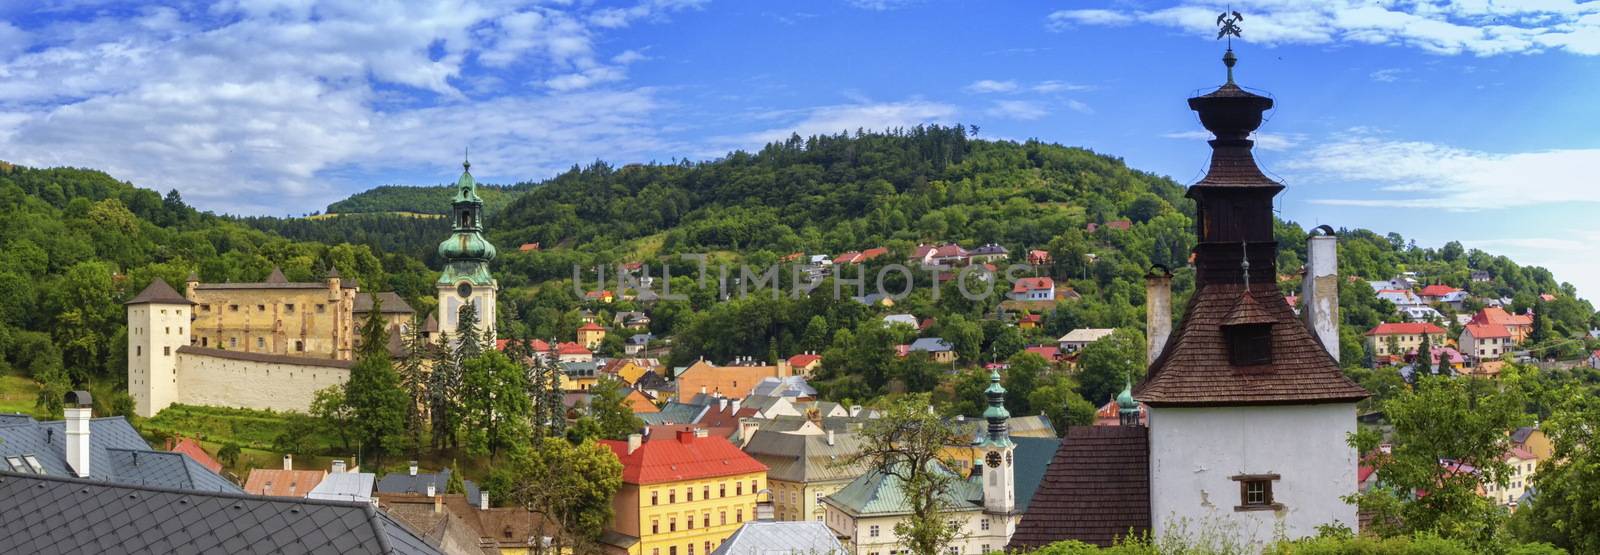 Banska Stiavnica panoramic view with old castle, knocking tower and houses by day, Slovakia